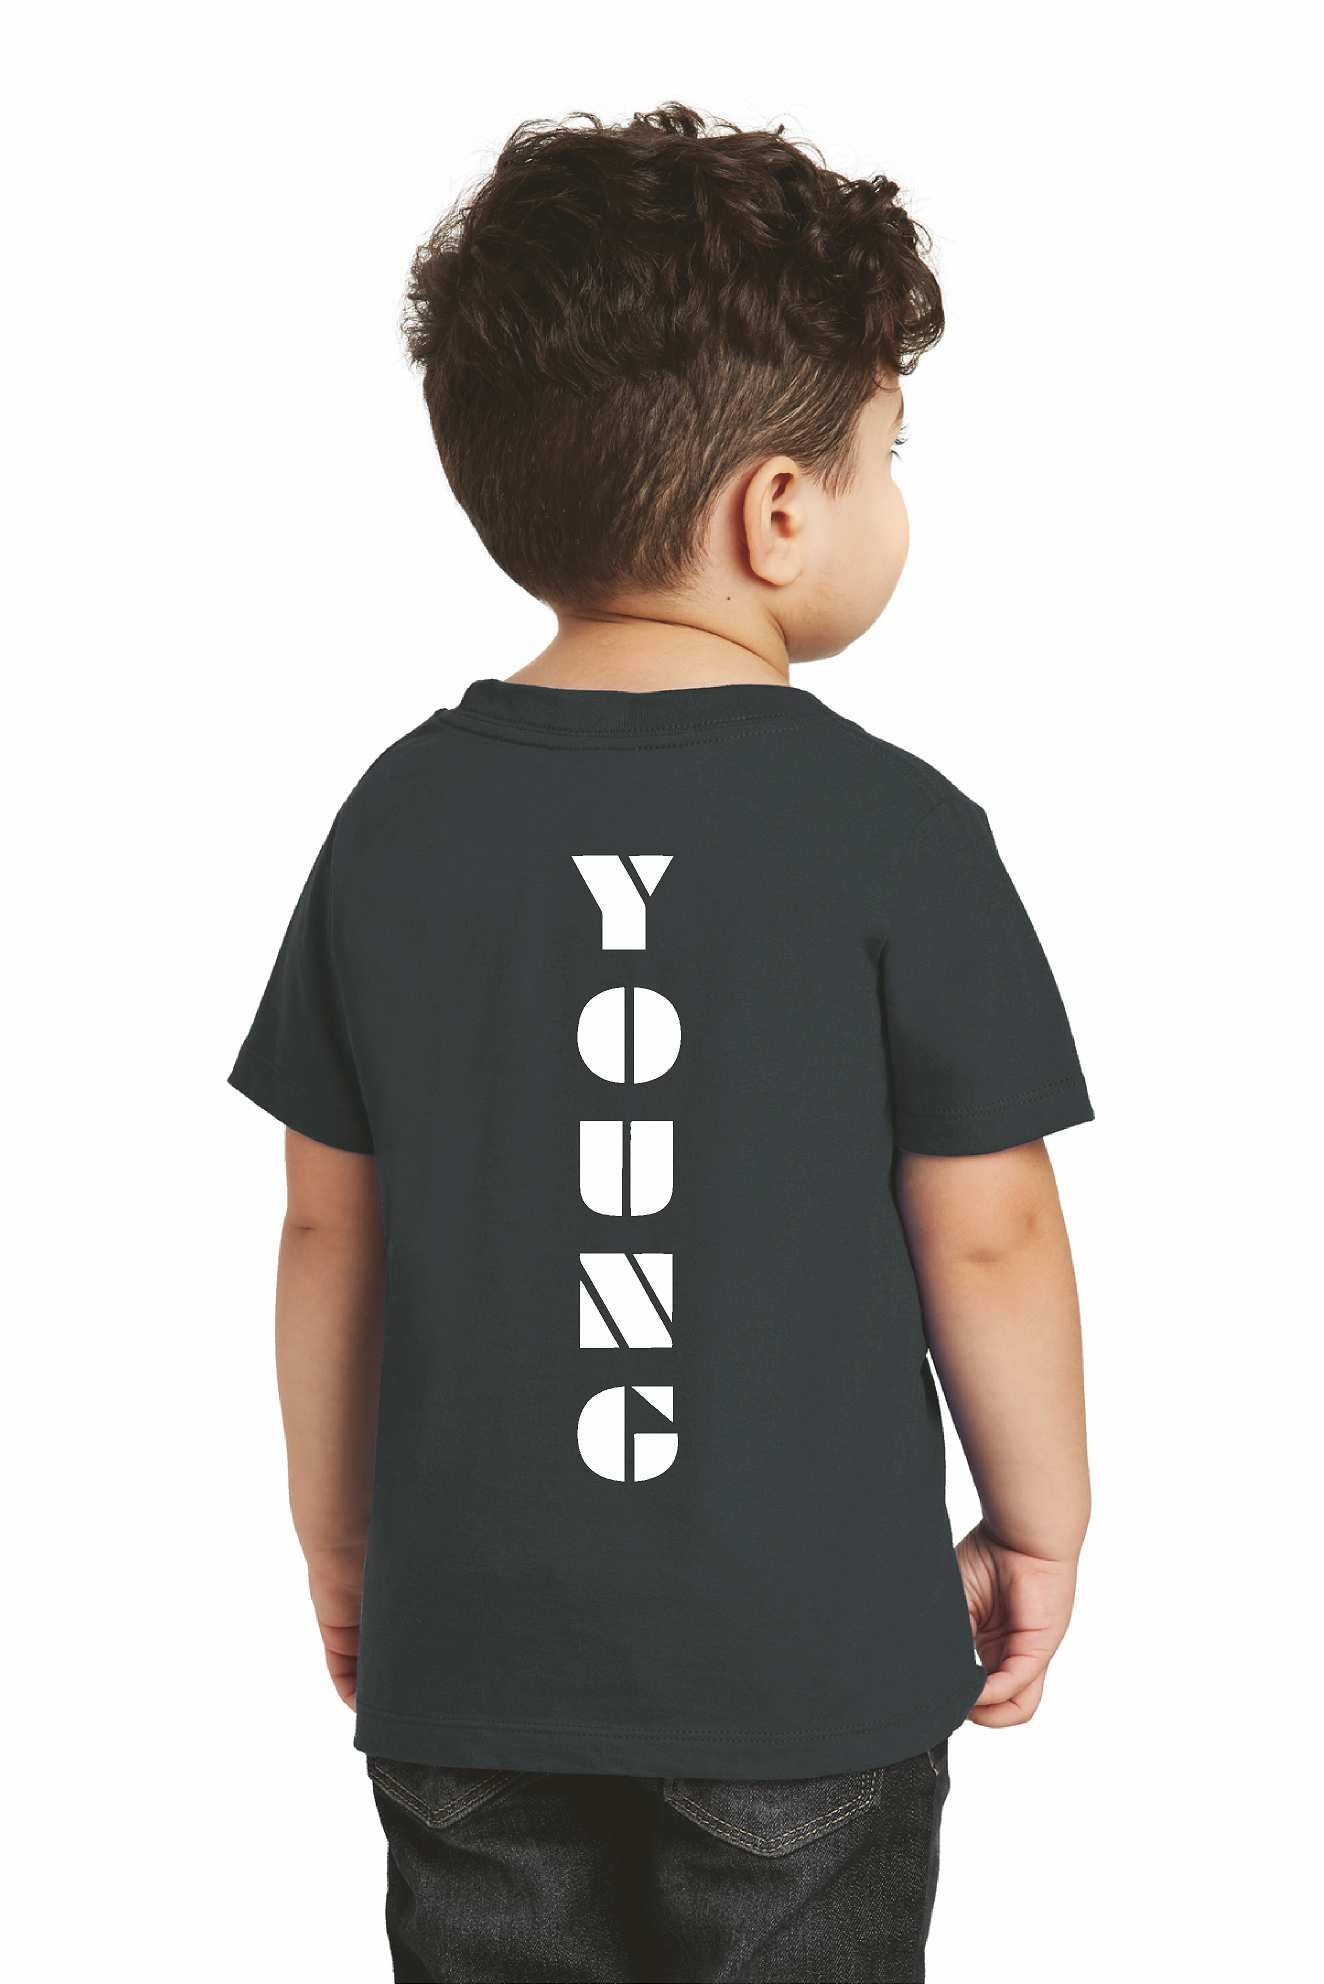 Cole Young Toddler Unisex Tshirts RS3321